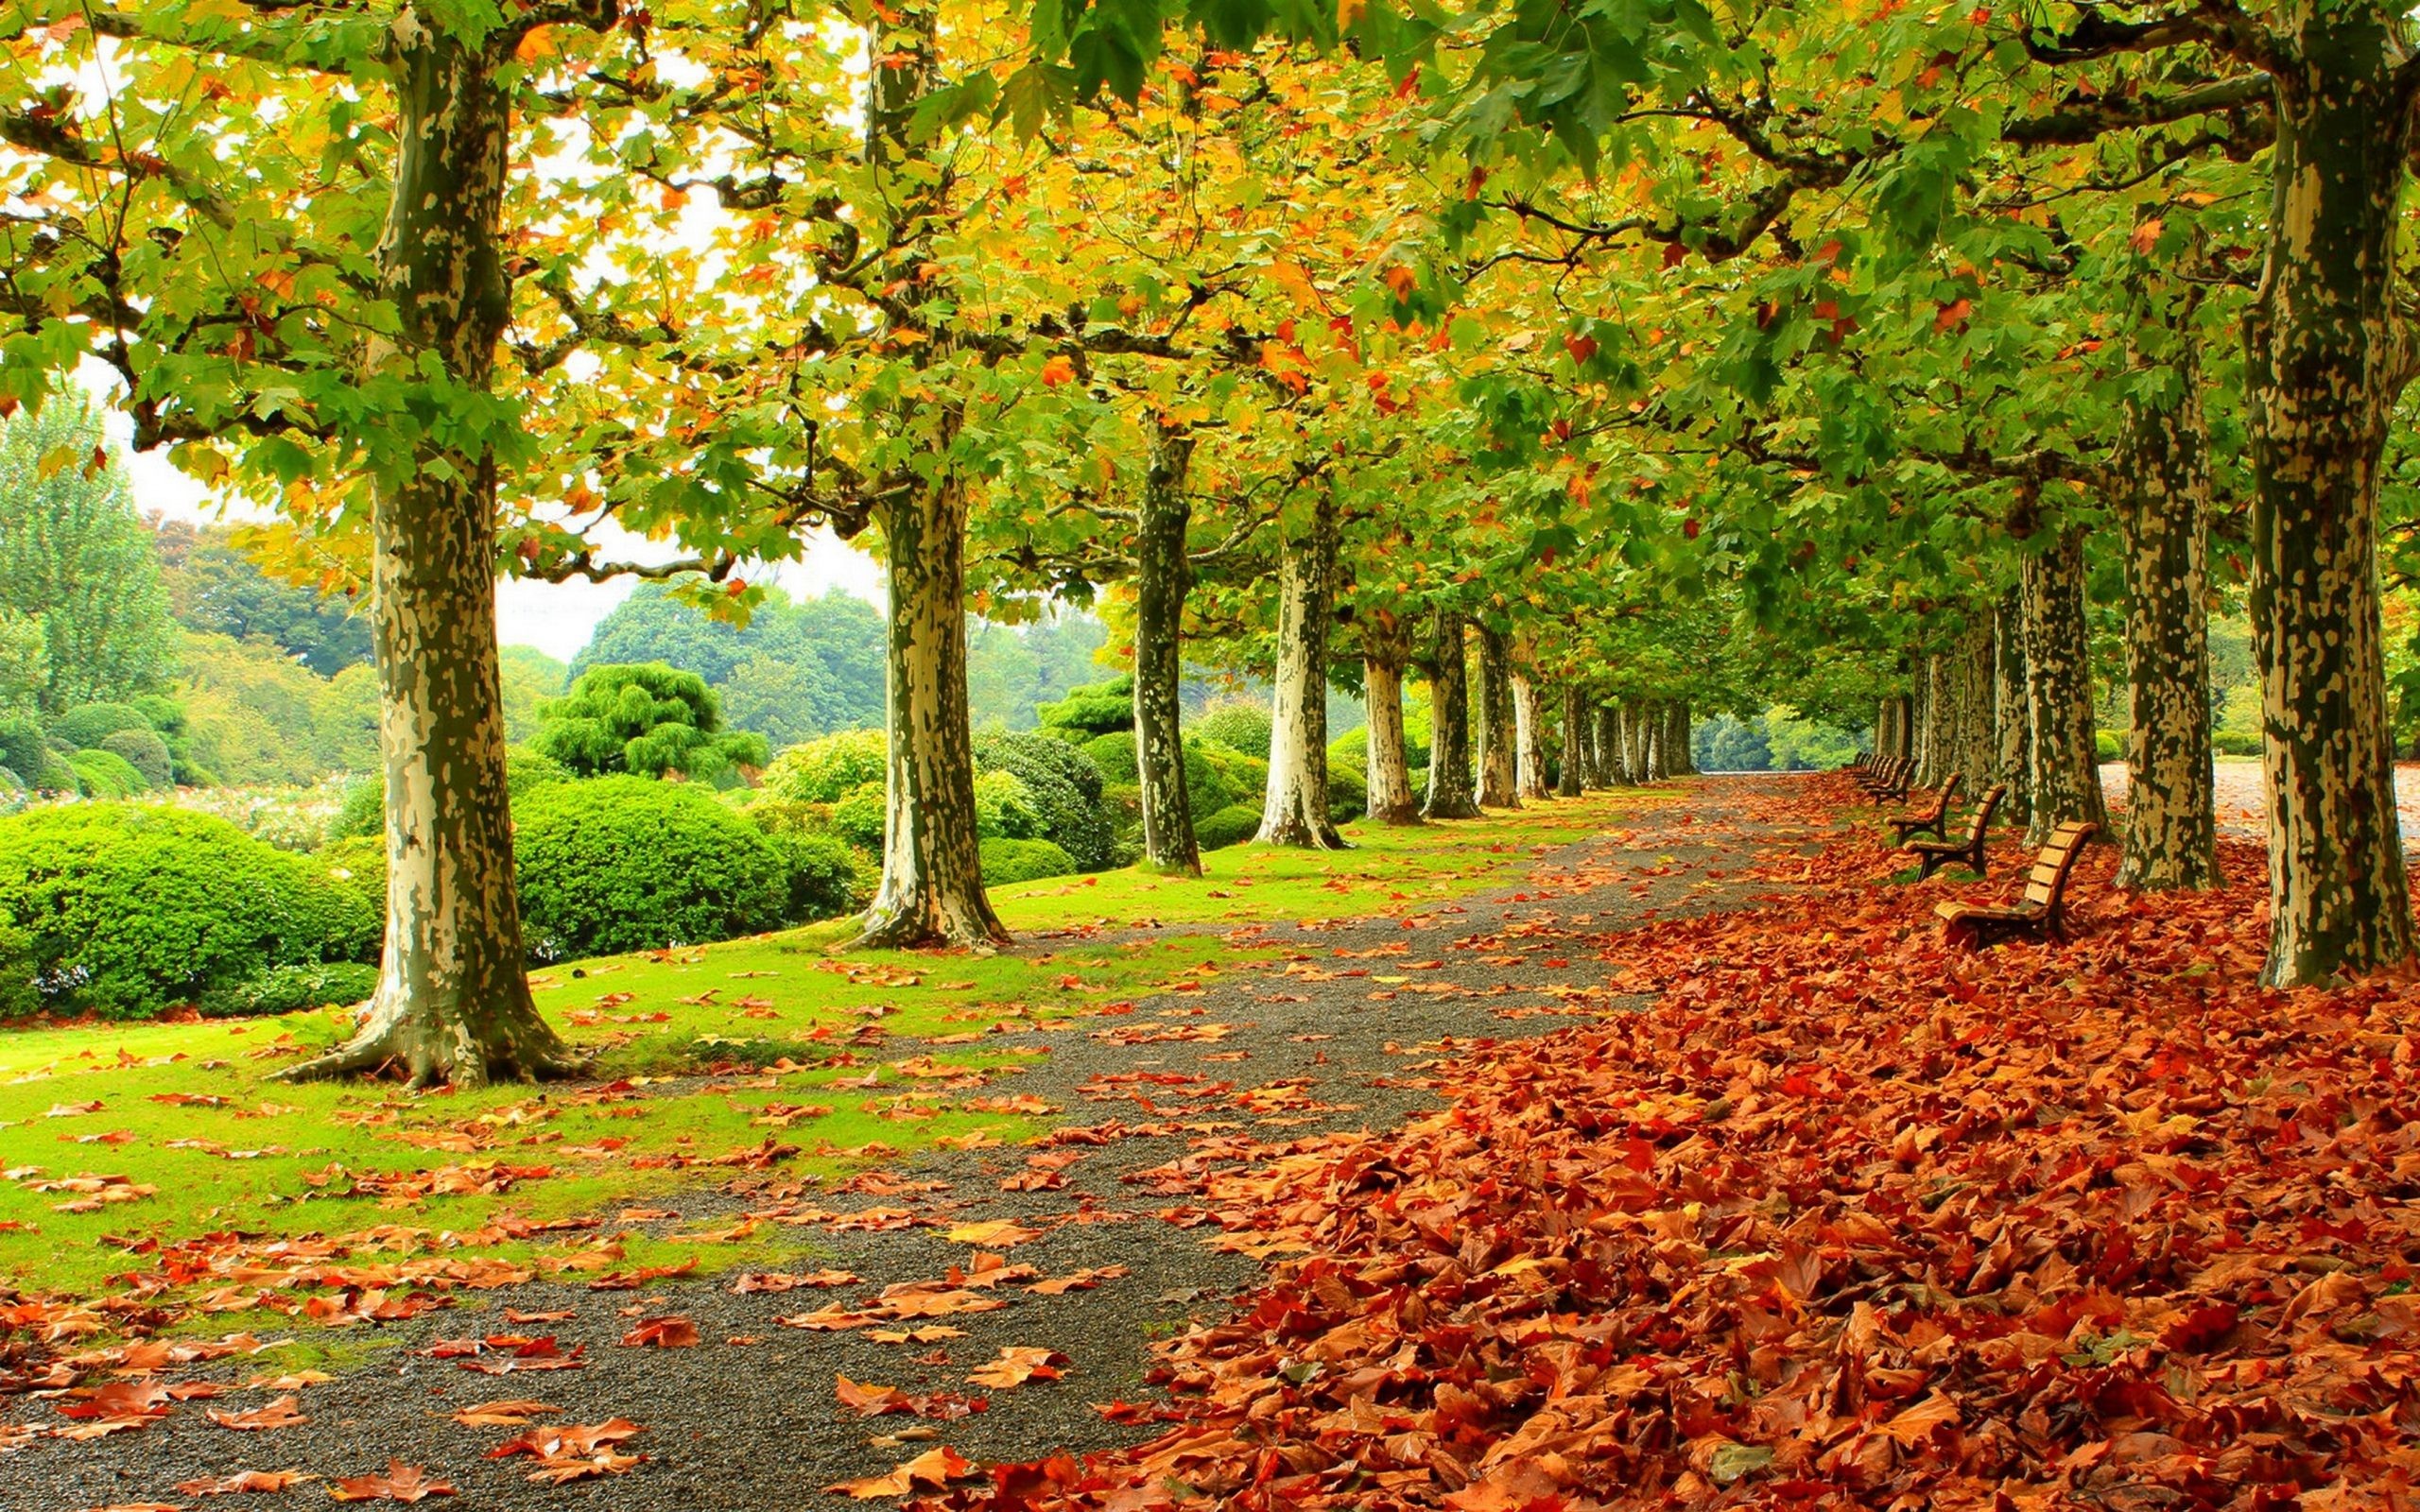 2560x1600 Autumn Fall Deciduous Trees Park Fallen Red Leaves Wooden Benches Road  Wallpaper Hd 2560Ã1600